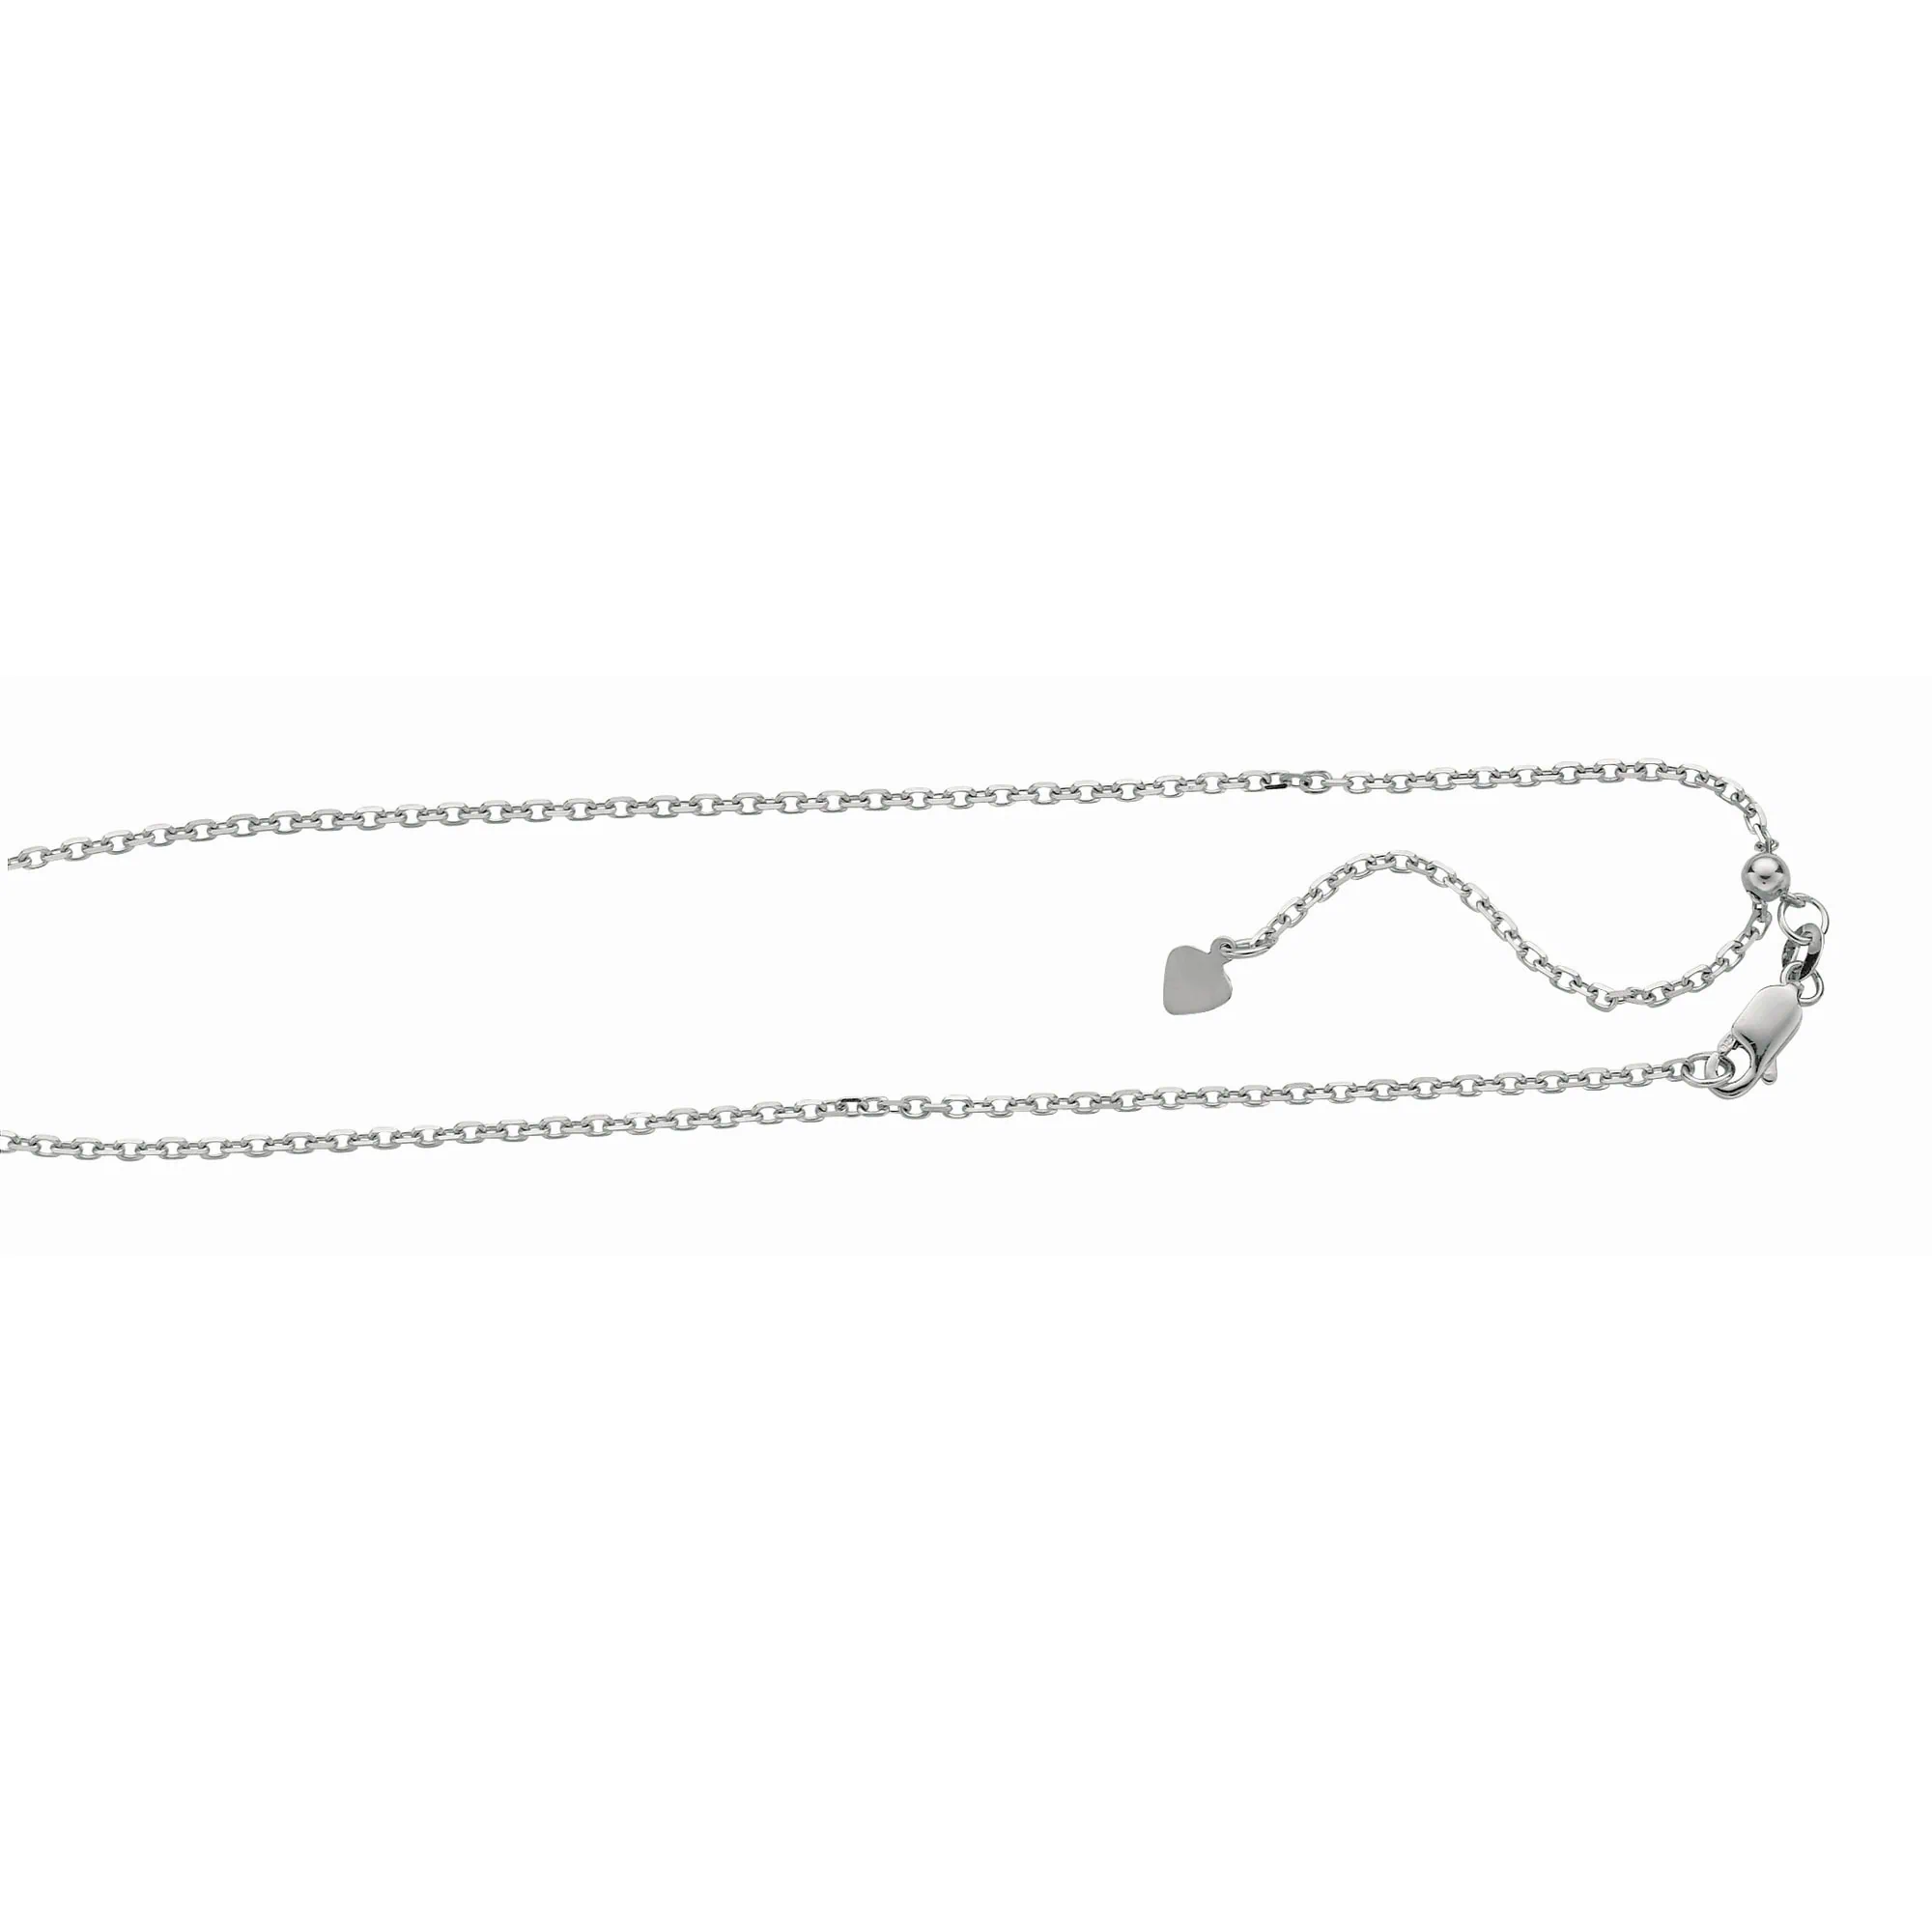 Silver 1.8mm Adjustable Cable Chain